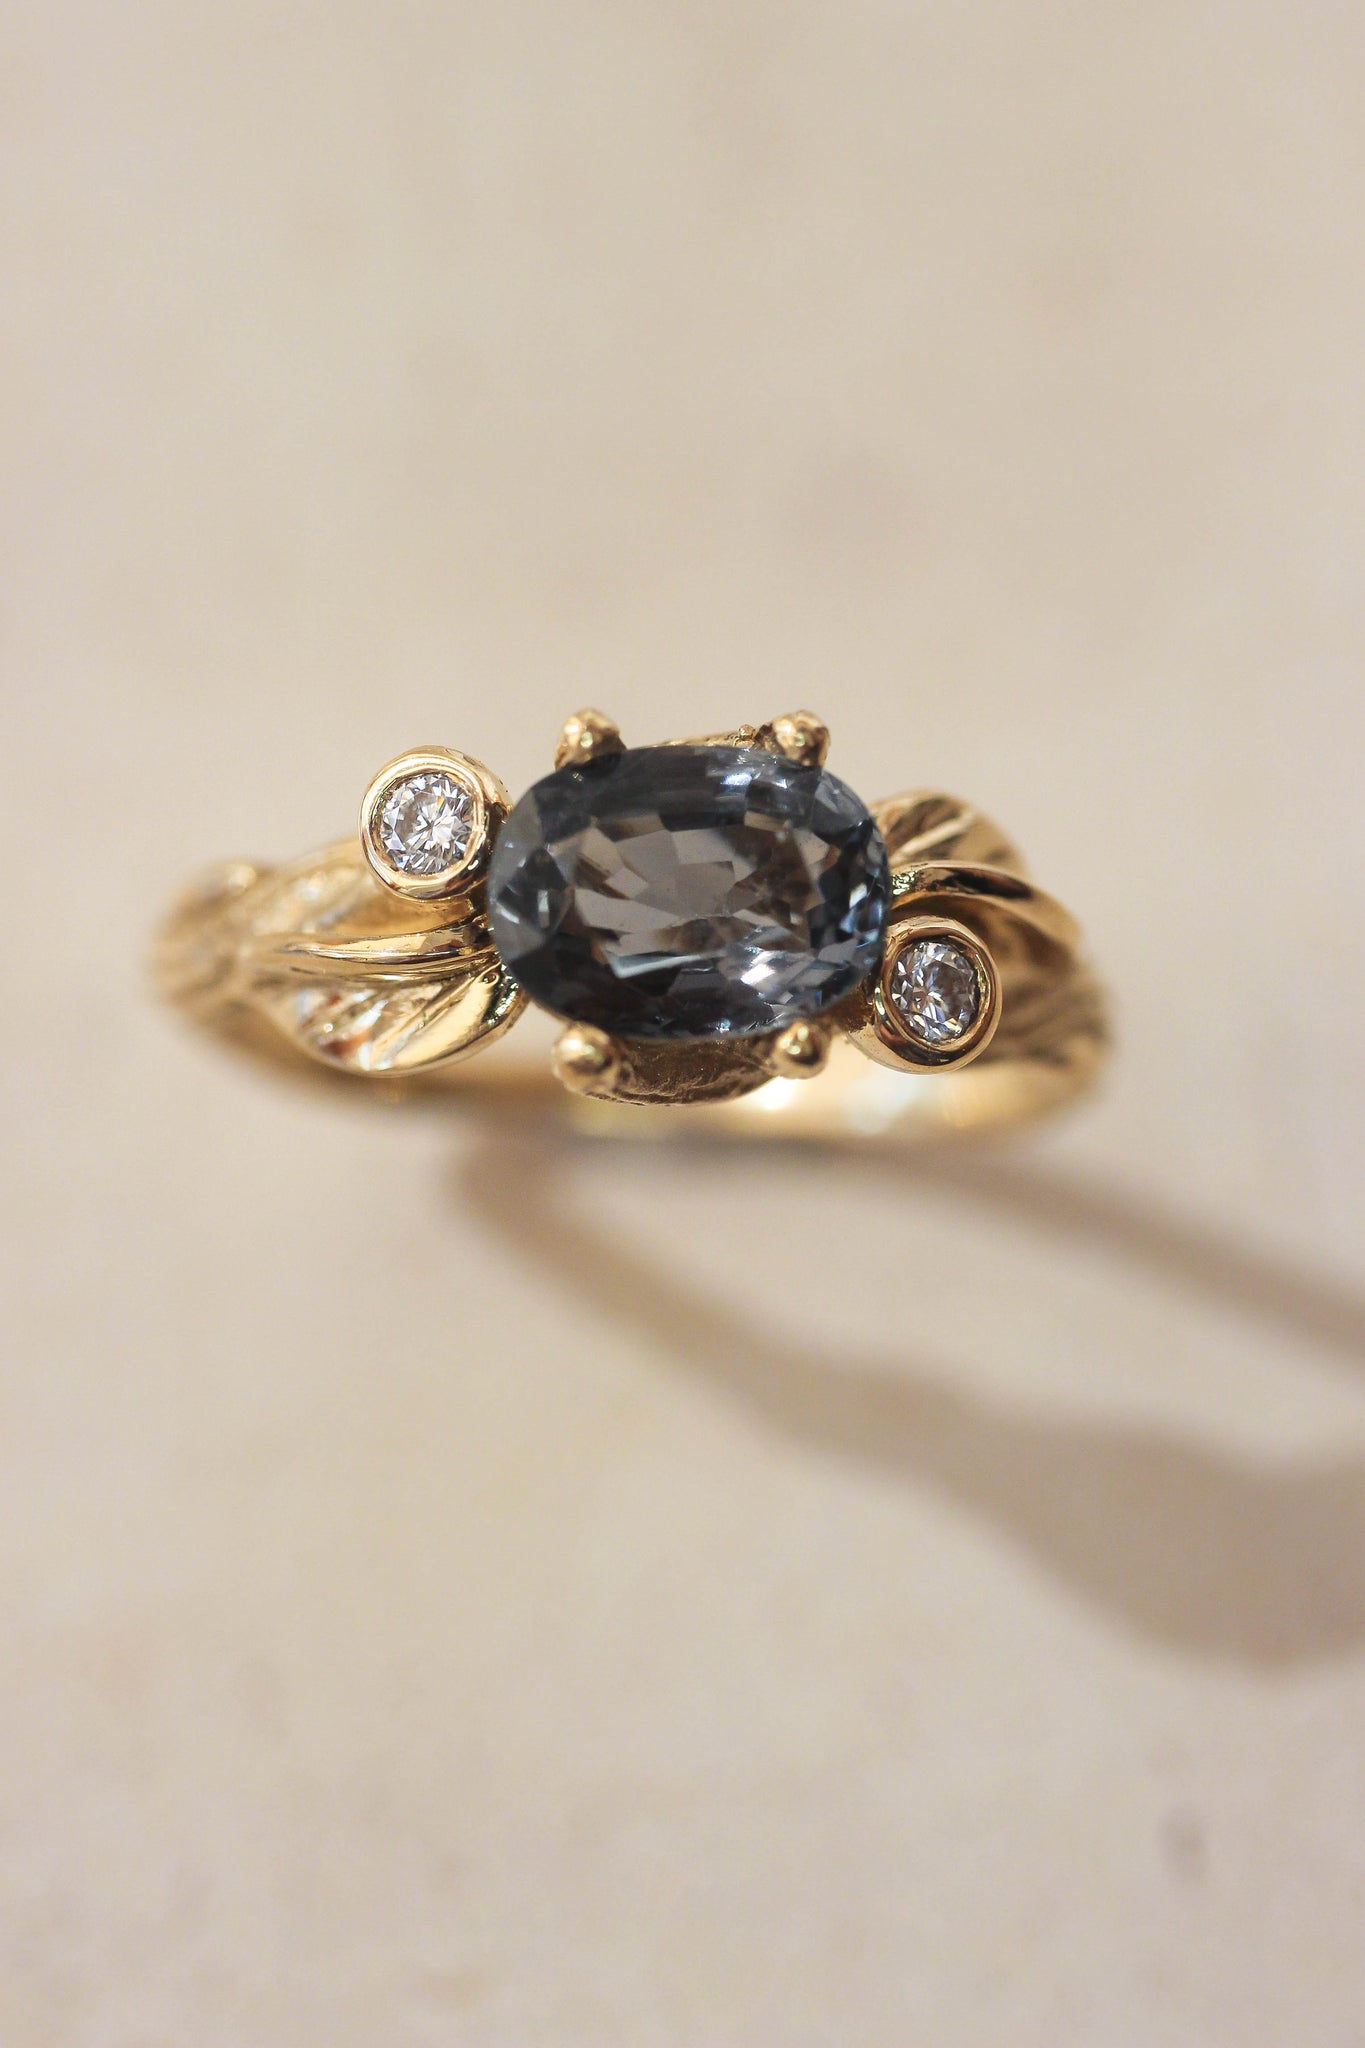 Branch engagement ring with grey spinel and diamonds / Arius - Eden Garden Jewelry™